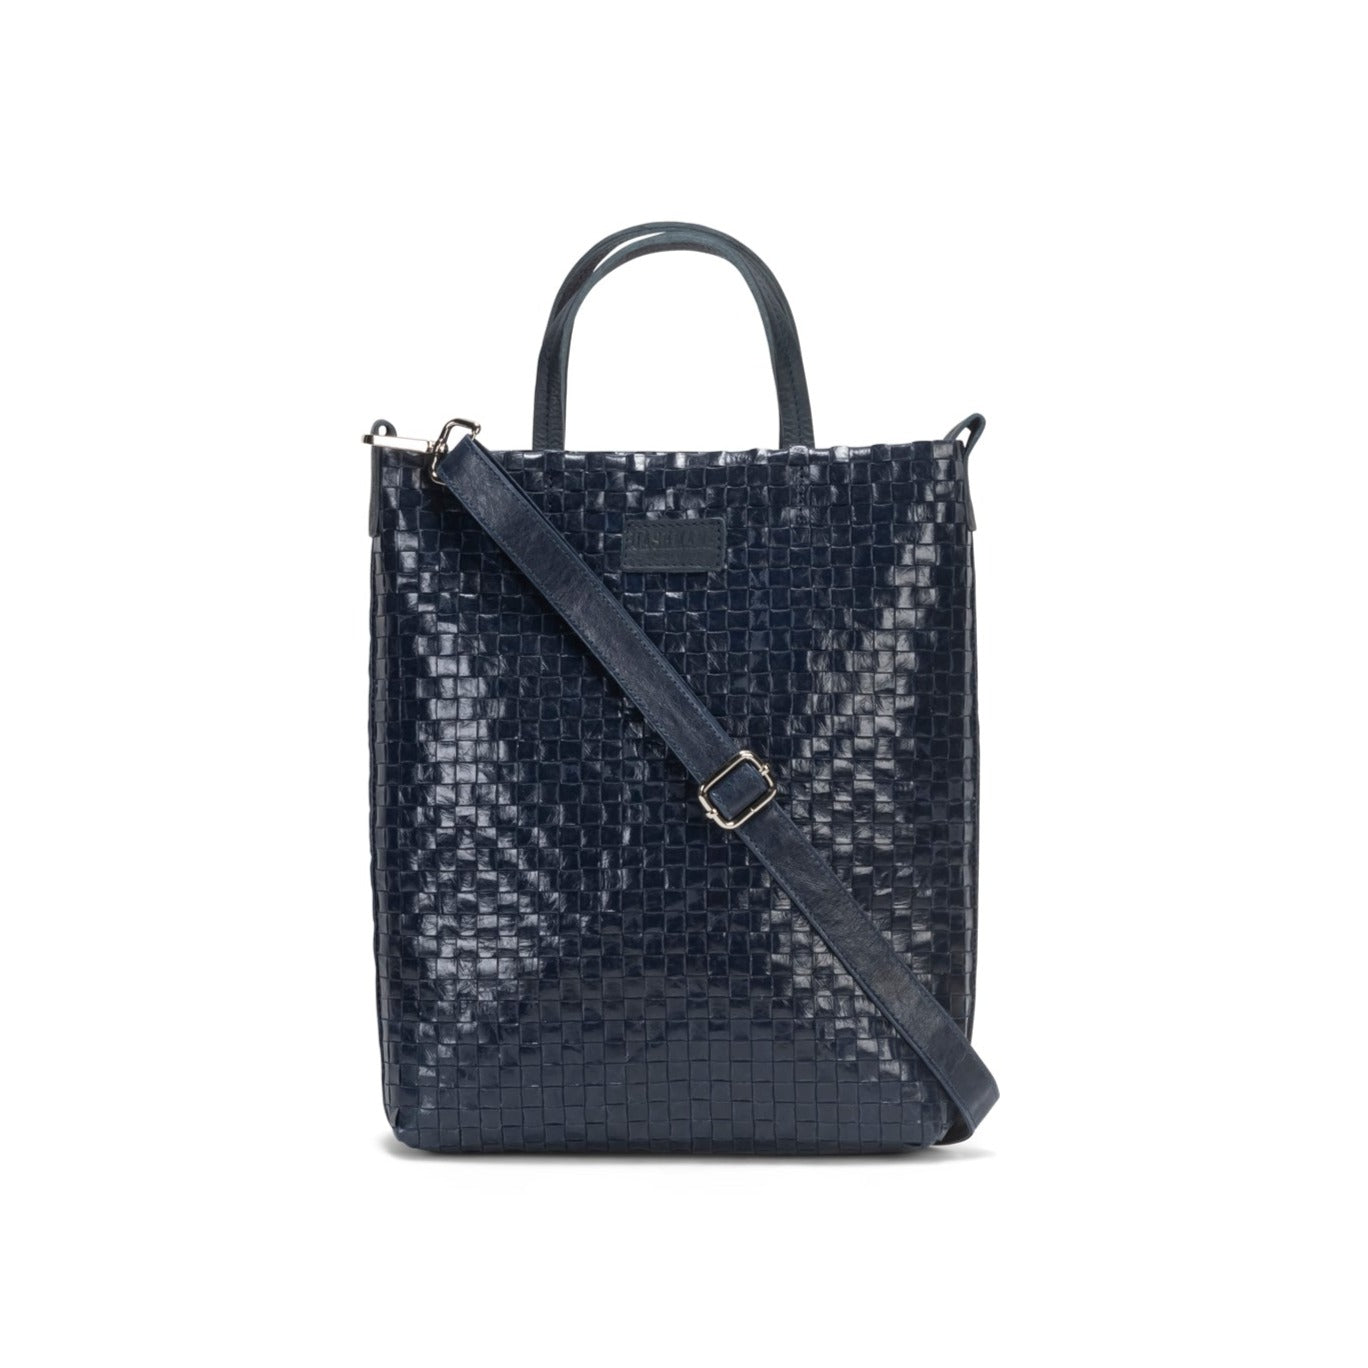 A woven washable paper tote bag is shown from the front angle. It features two top handles and a long adjustable shoulder strap. It is navy in colour.